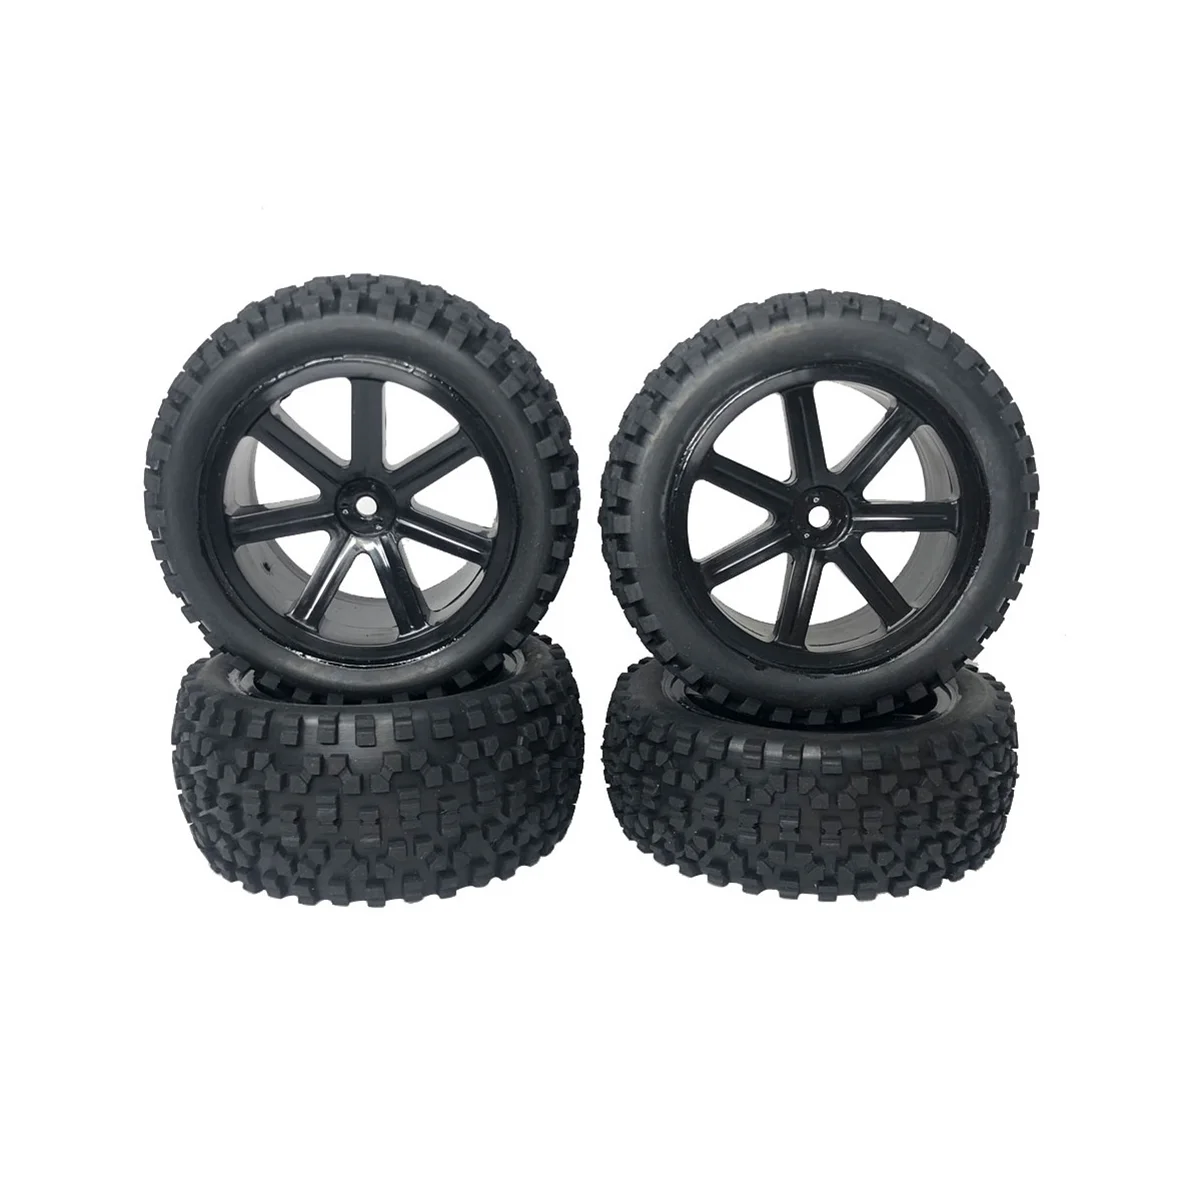 

4Pcs Large Tires Widened Tyre Wheel for WLtoys 144001 144010 124019 124018 124017 12428 1/12 1/14 RC Car Upgrade Parts